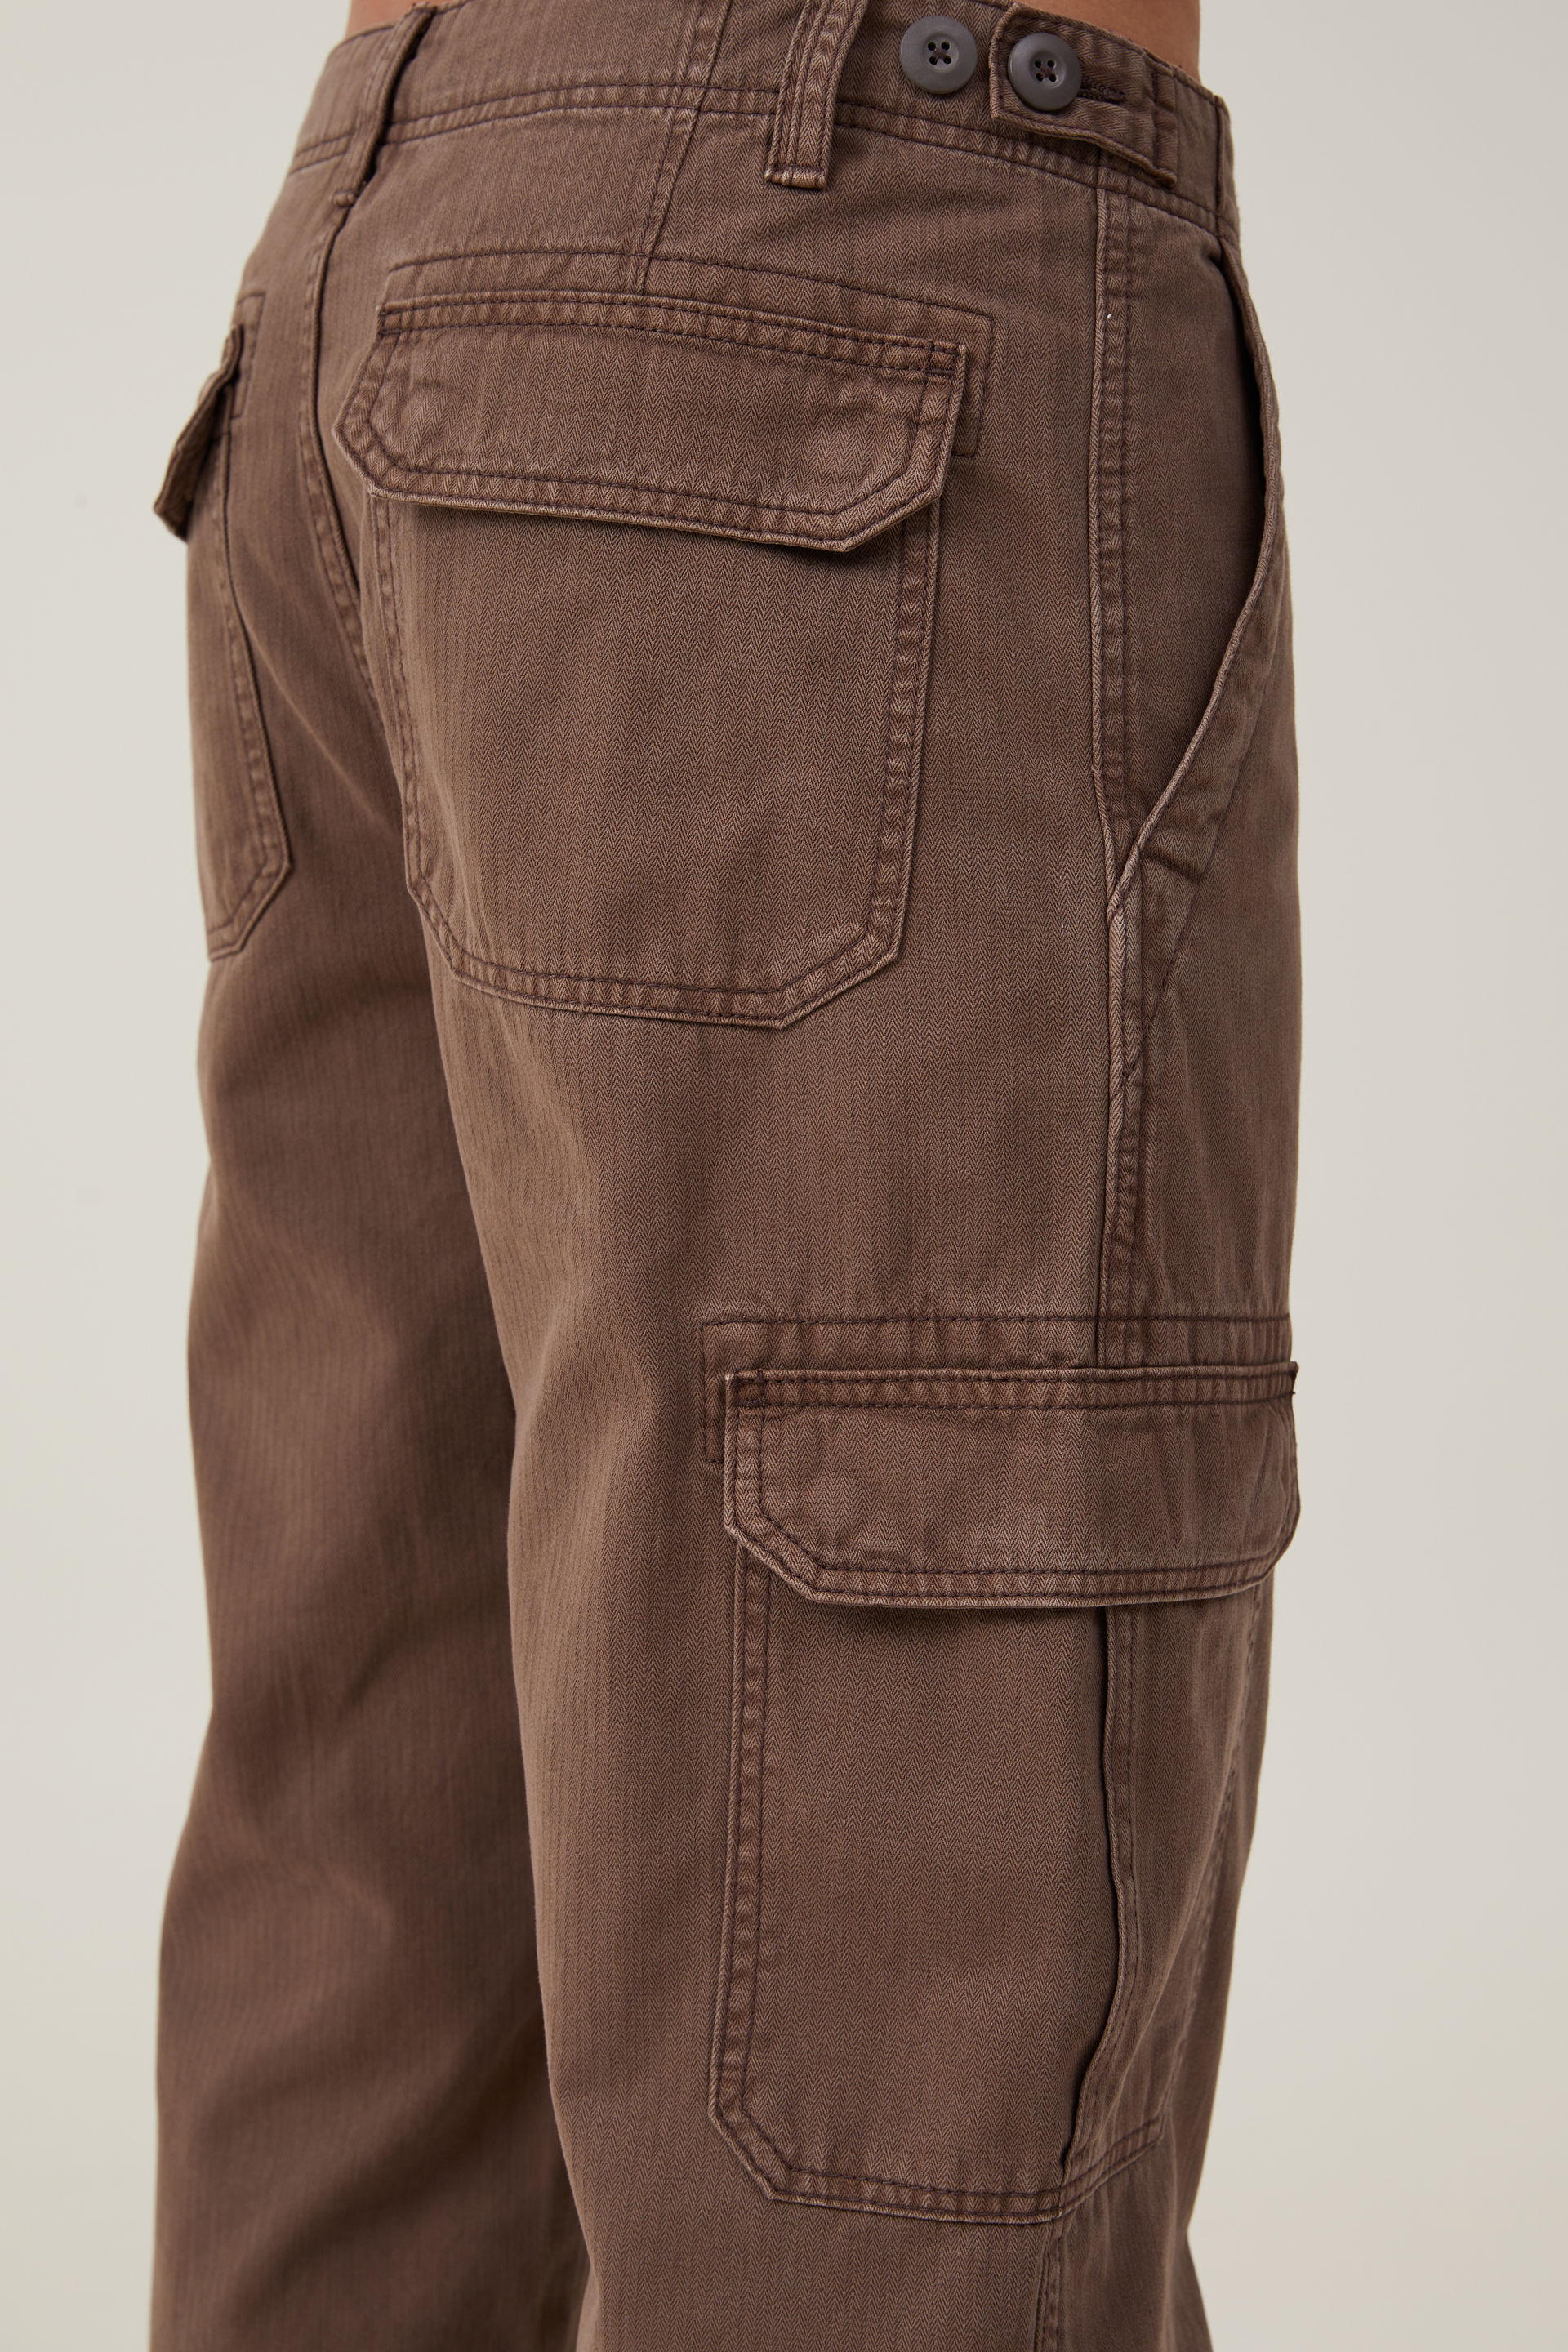 Buy Cargo Pants For Men Online At Best Prices In India